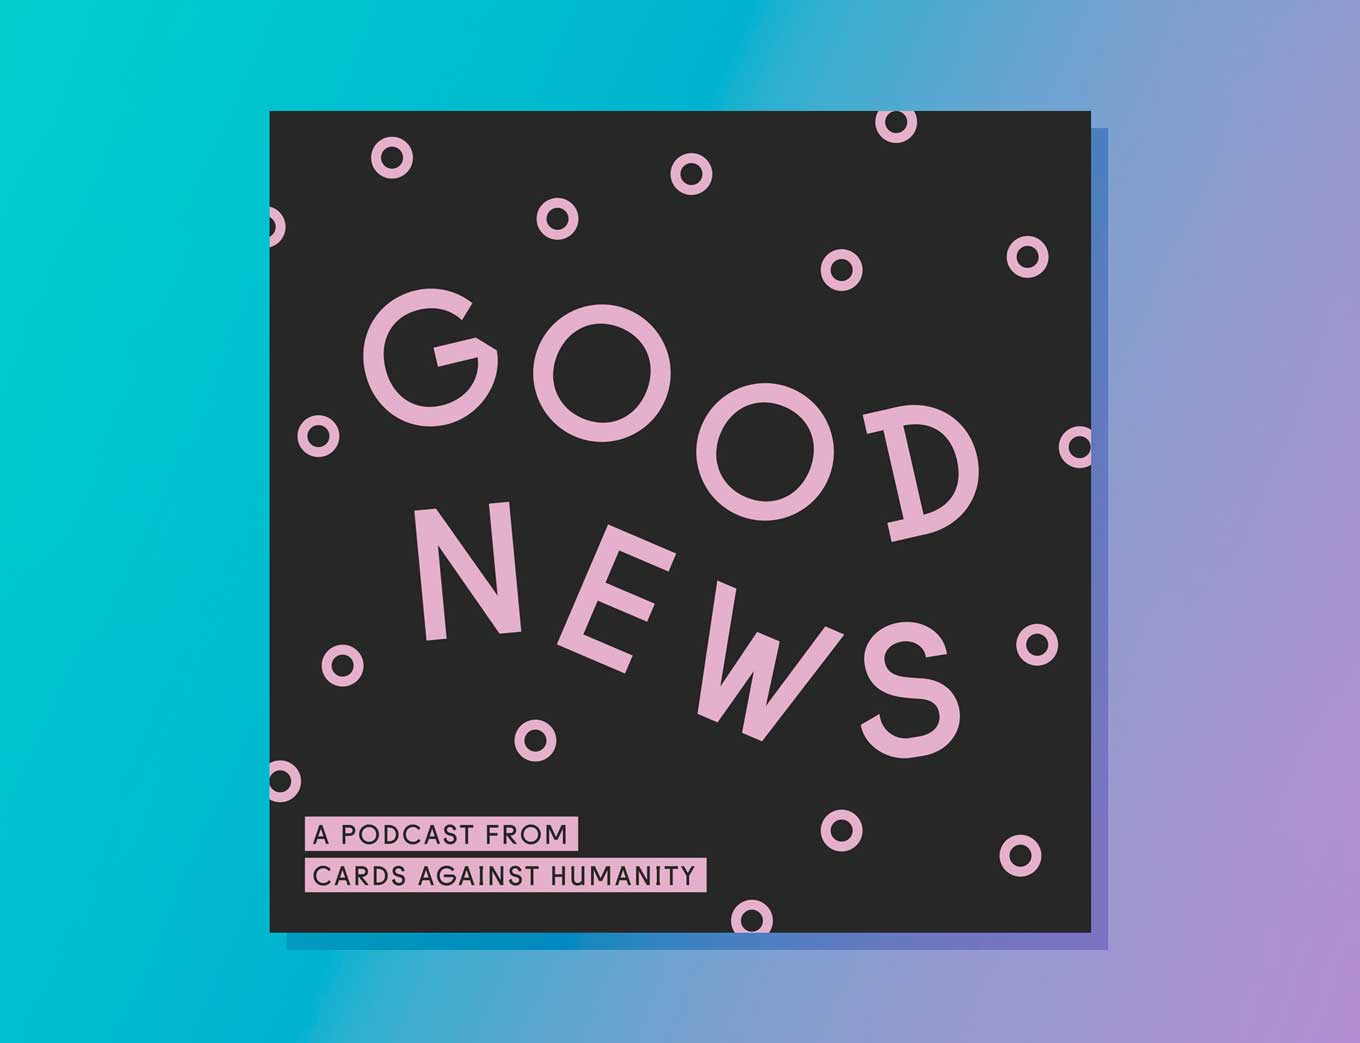 Podcast Artwork: Good News - A Podcast From Cards Against Humanity